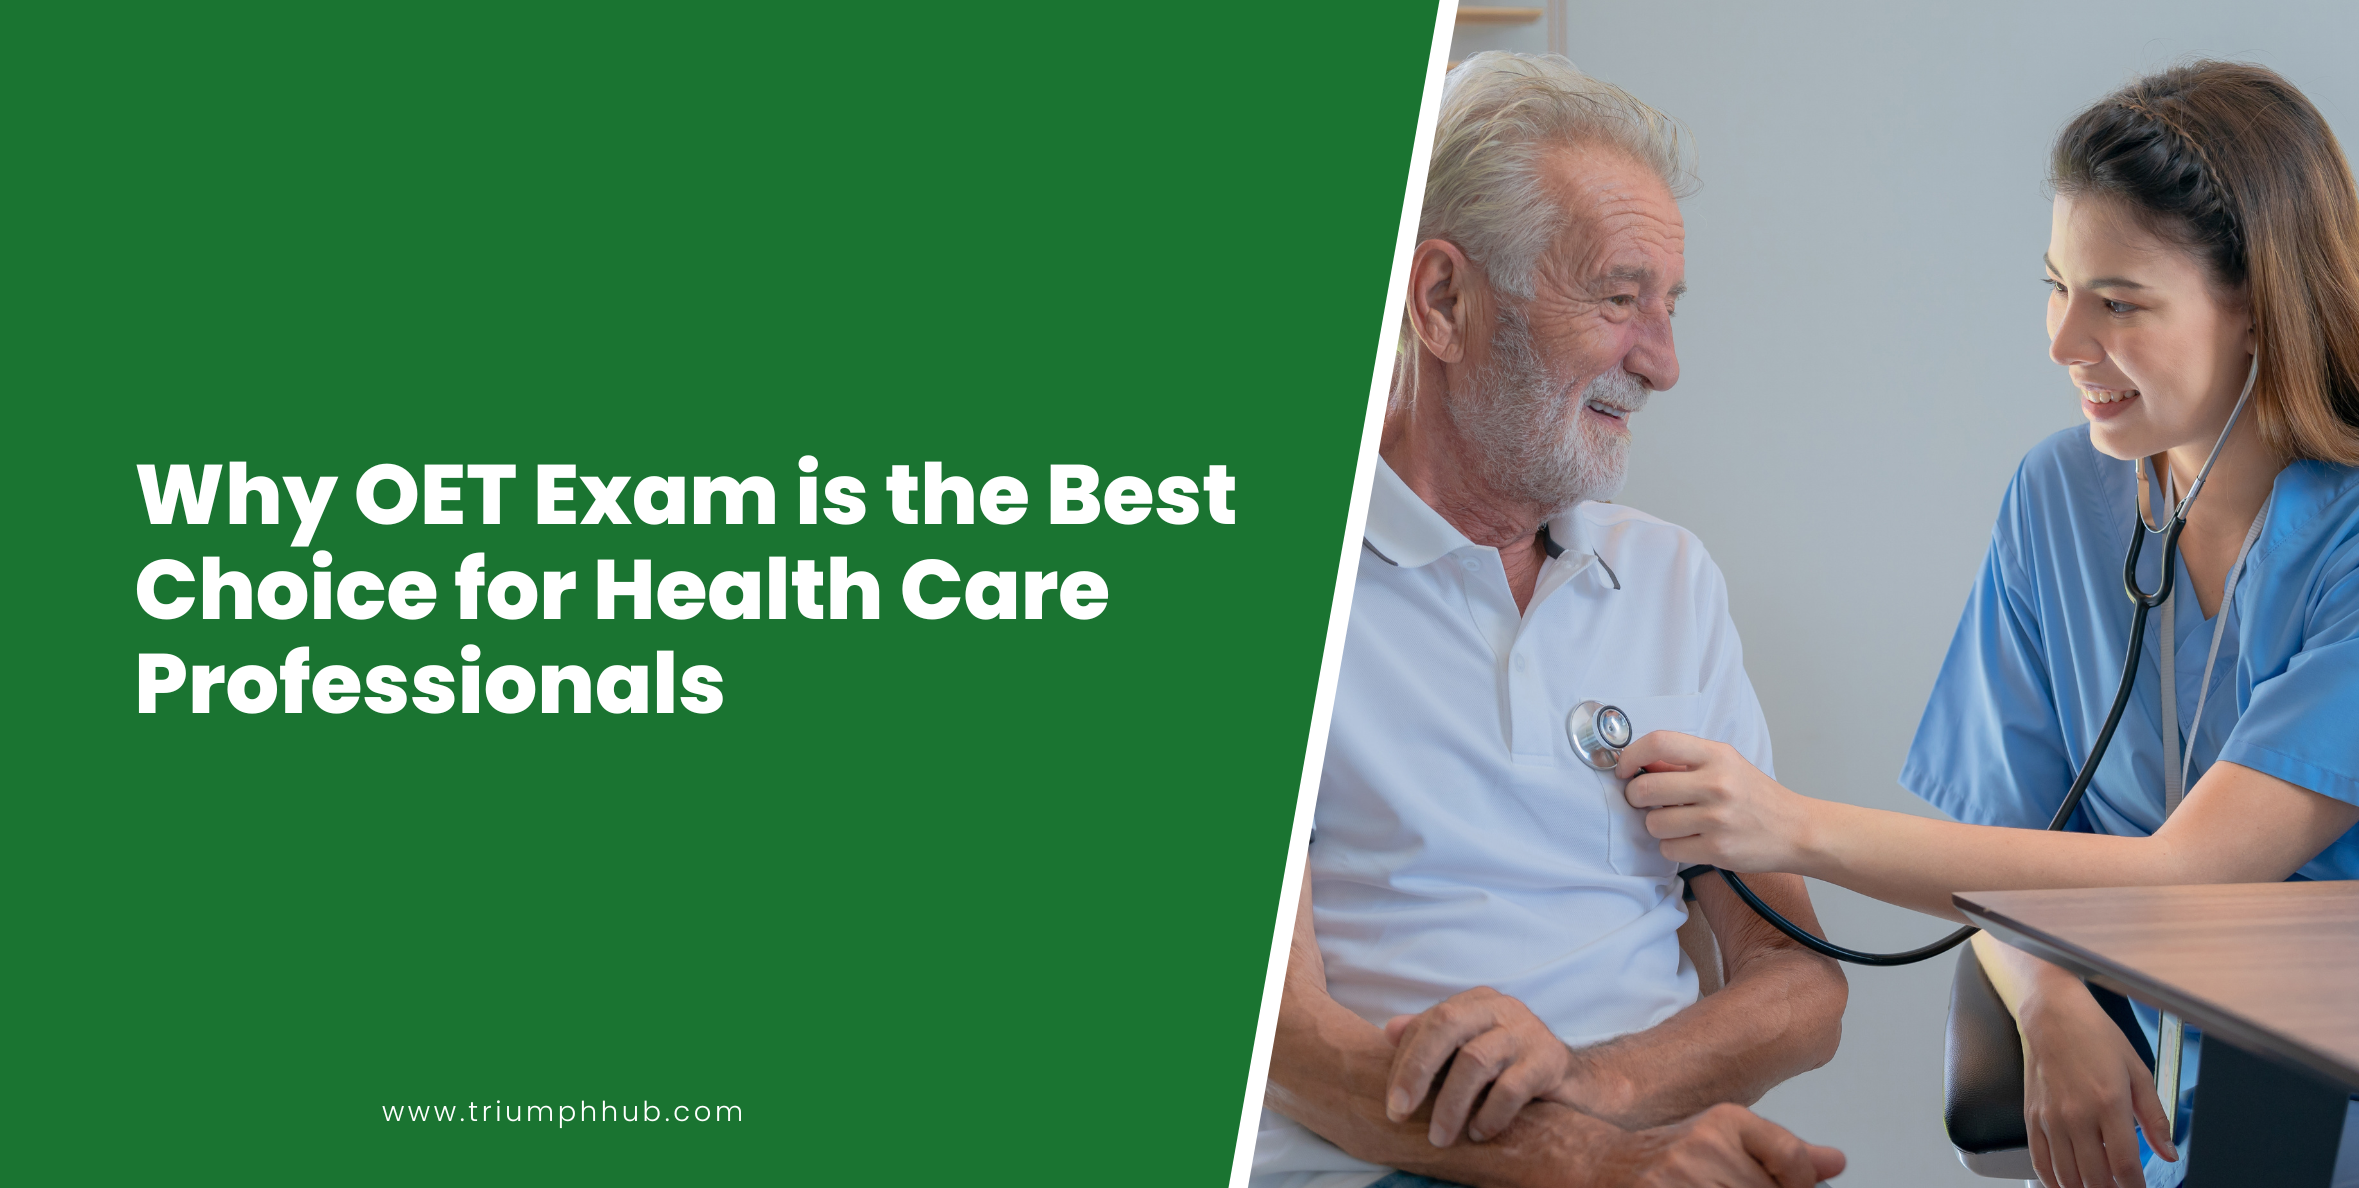 alt="Why OET Exam is the Best Choice for Health Care Professionals"